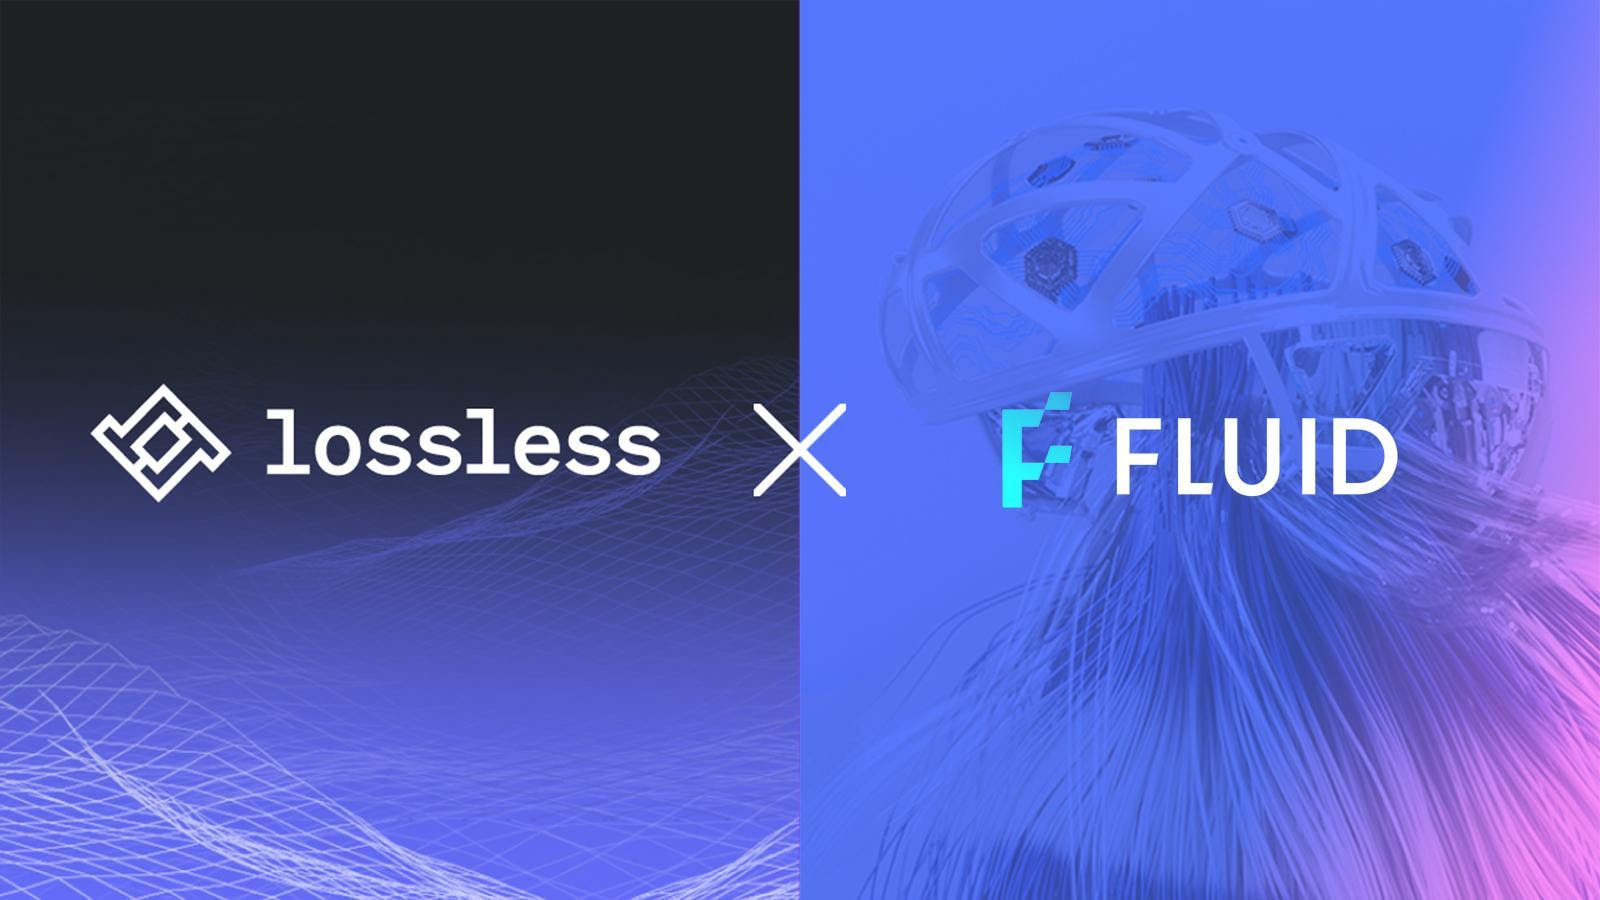 FLUID Announces LERC20 Integration to Power its $FLD Token With Hack Mitigation Capabilities